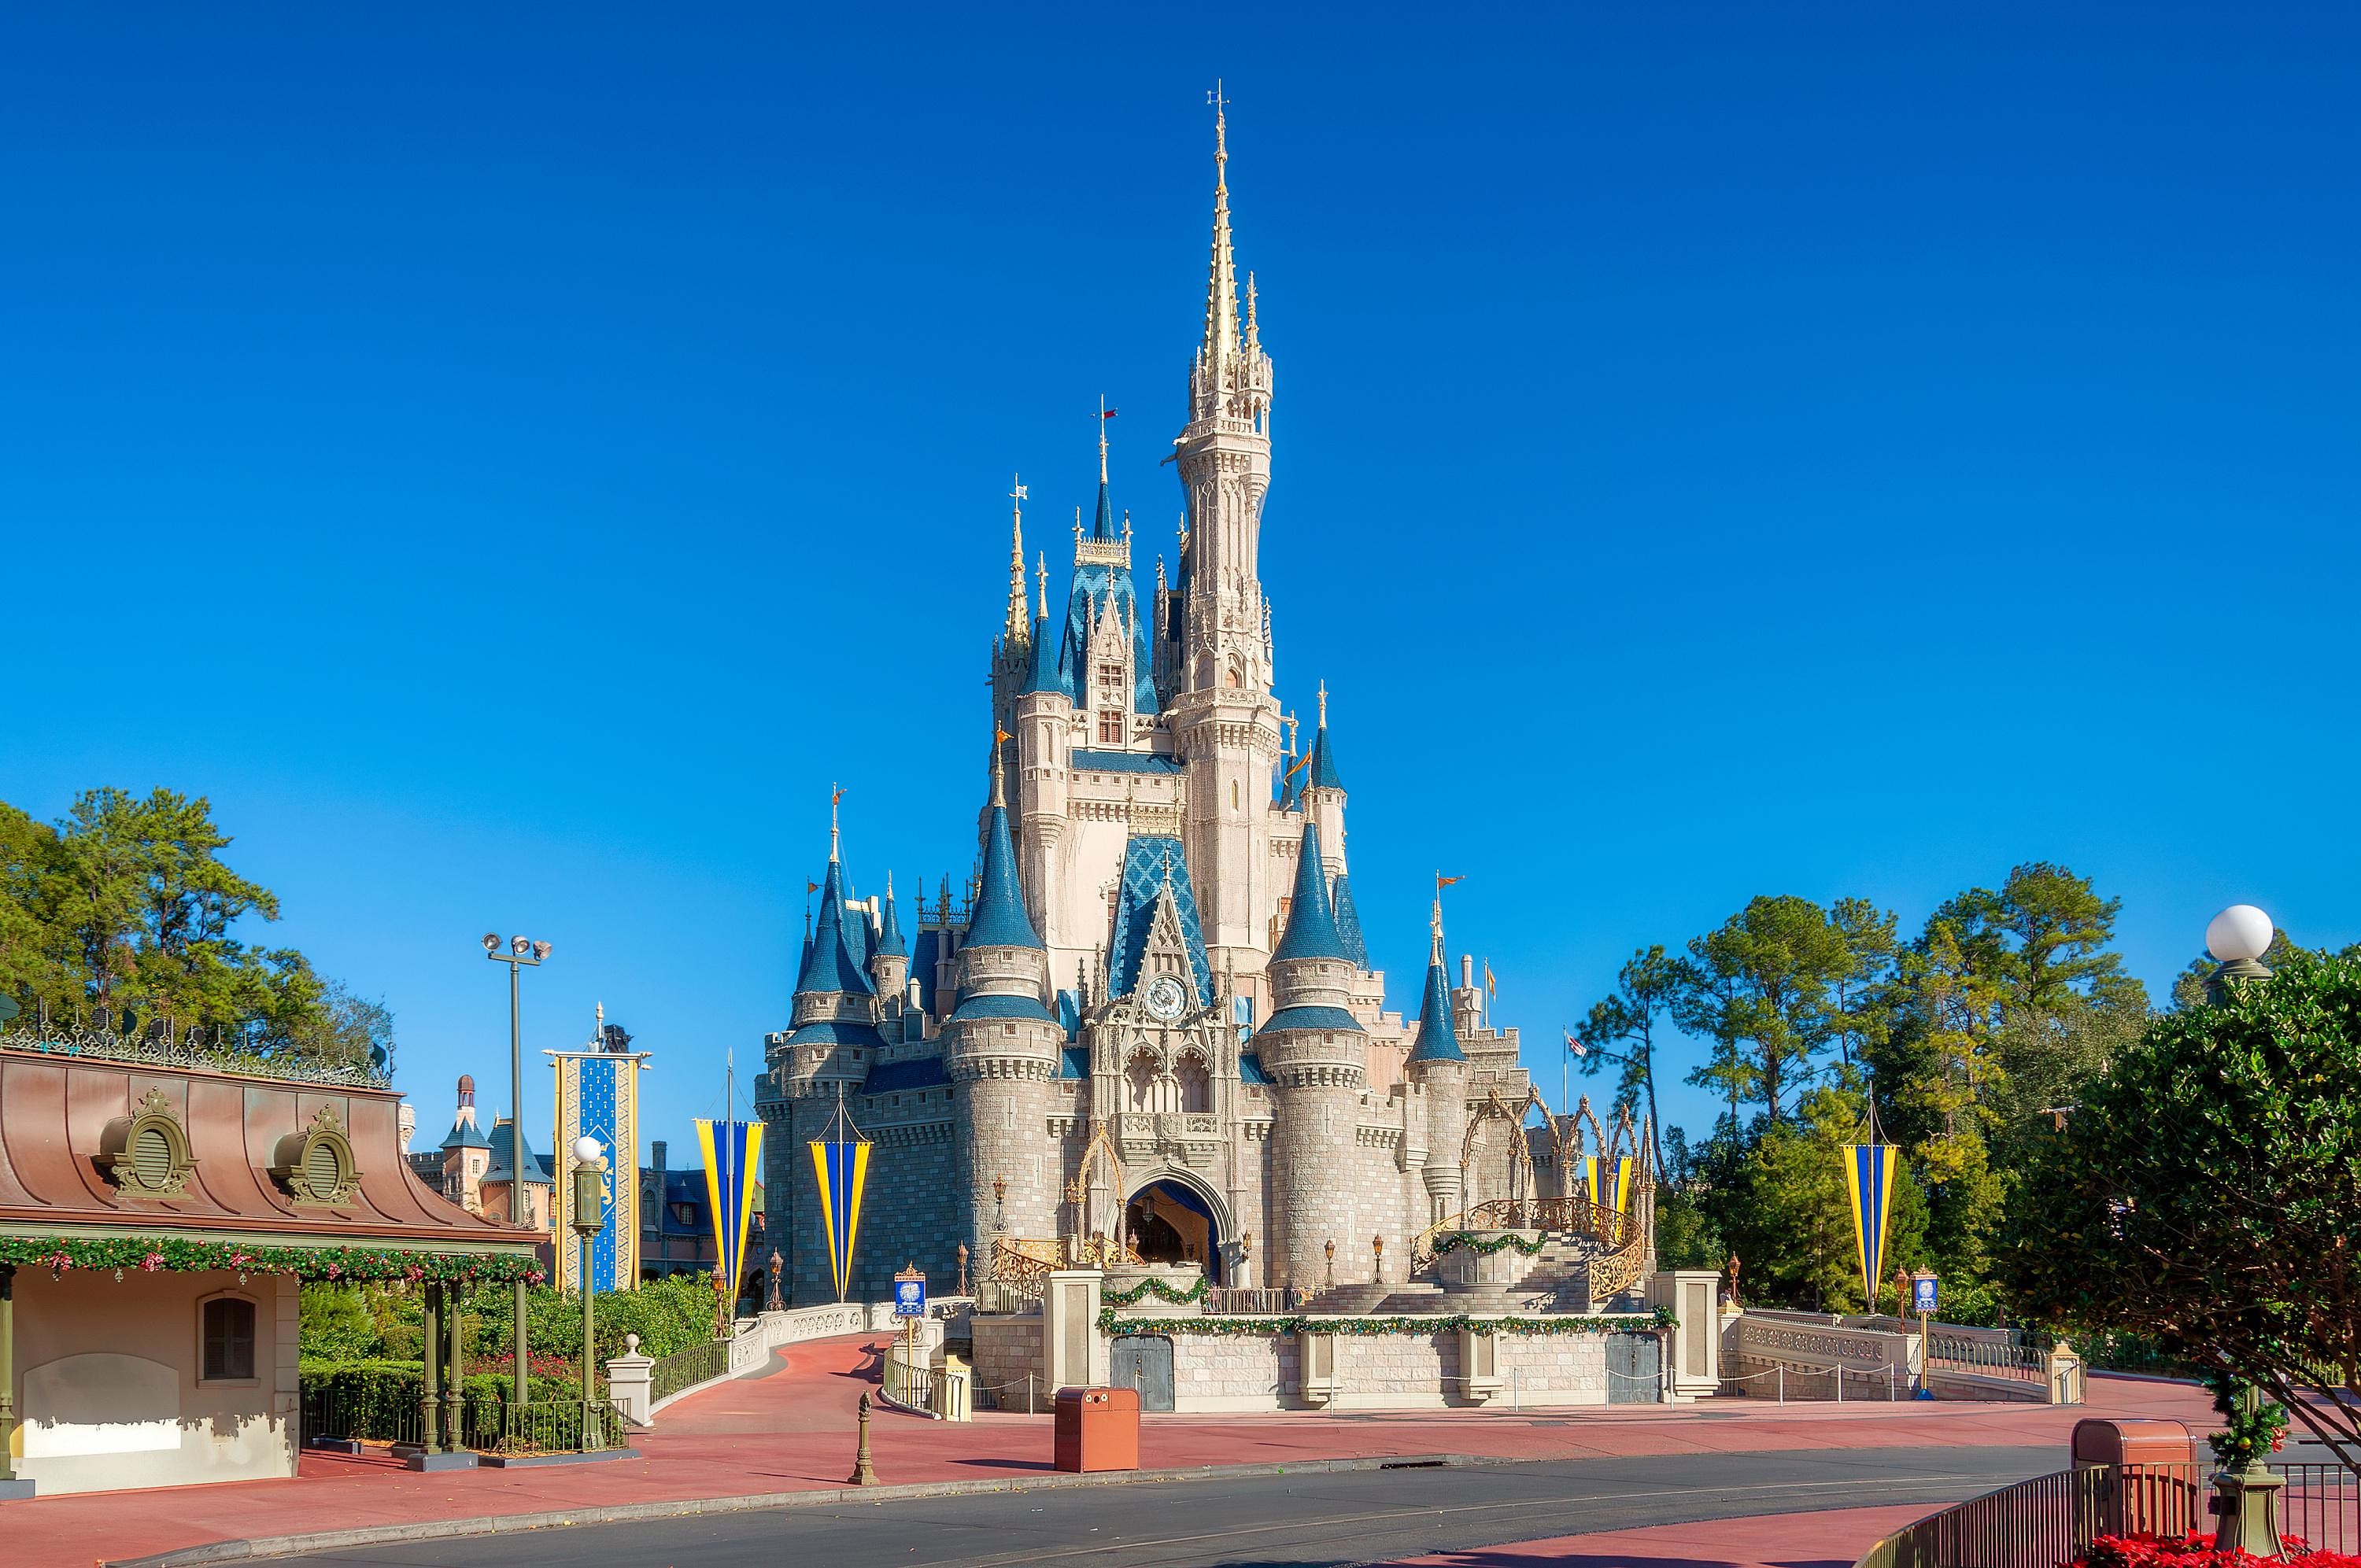 Legal setback for Disney in its battle against the governor of Florida